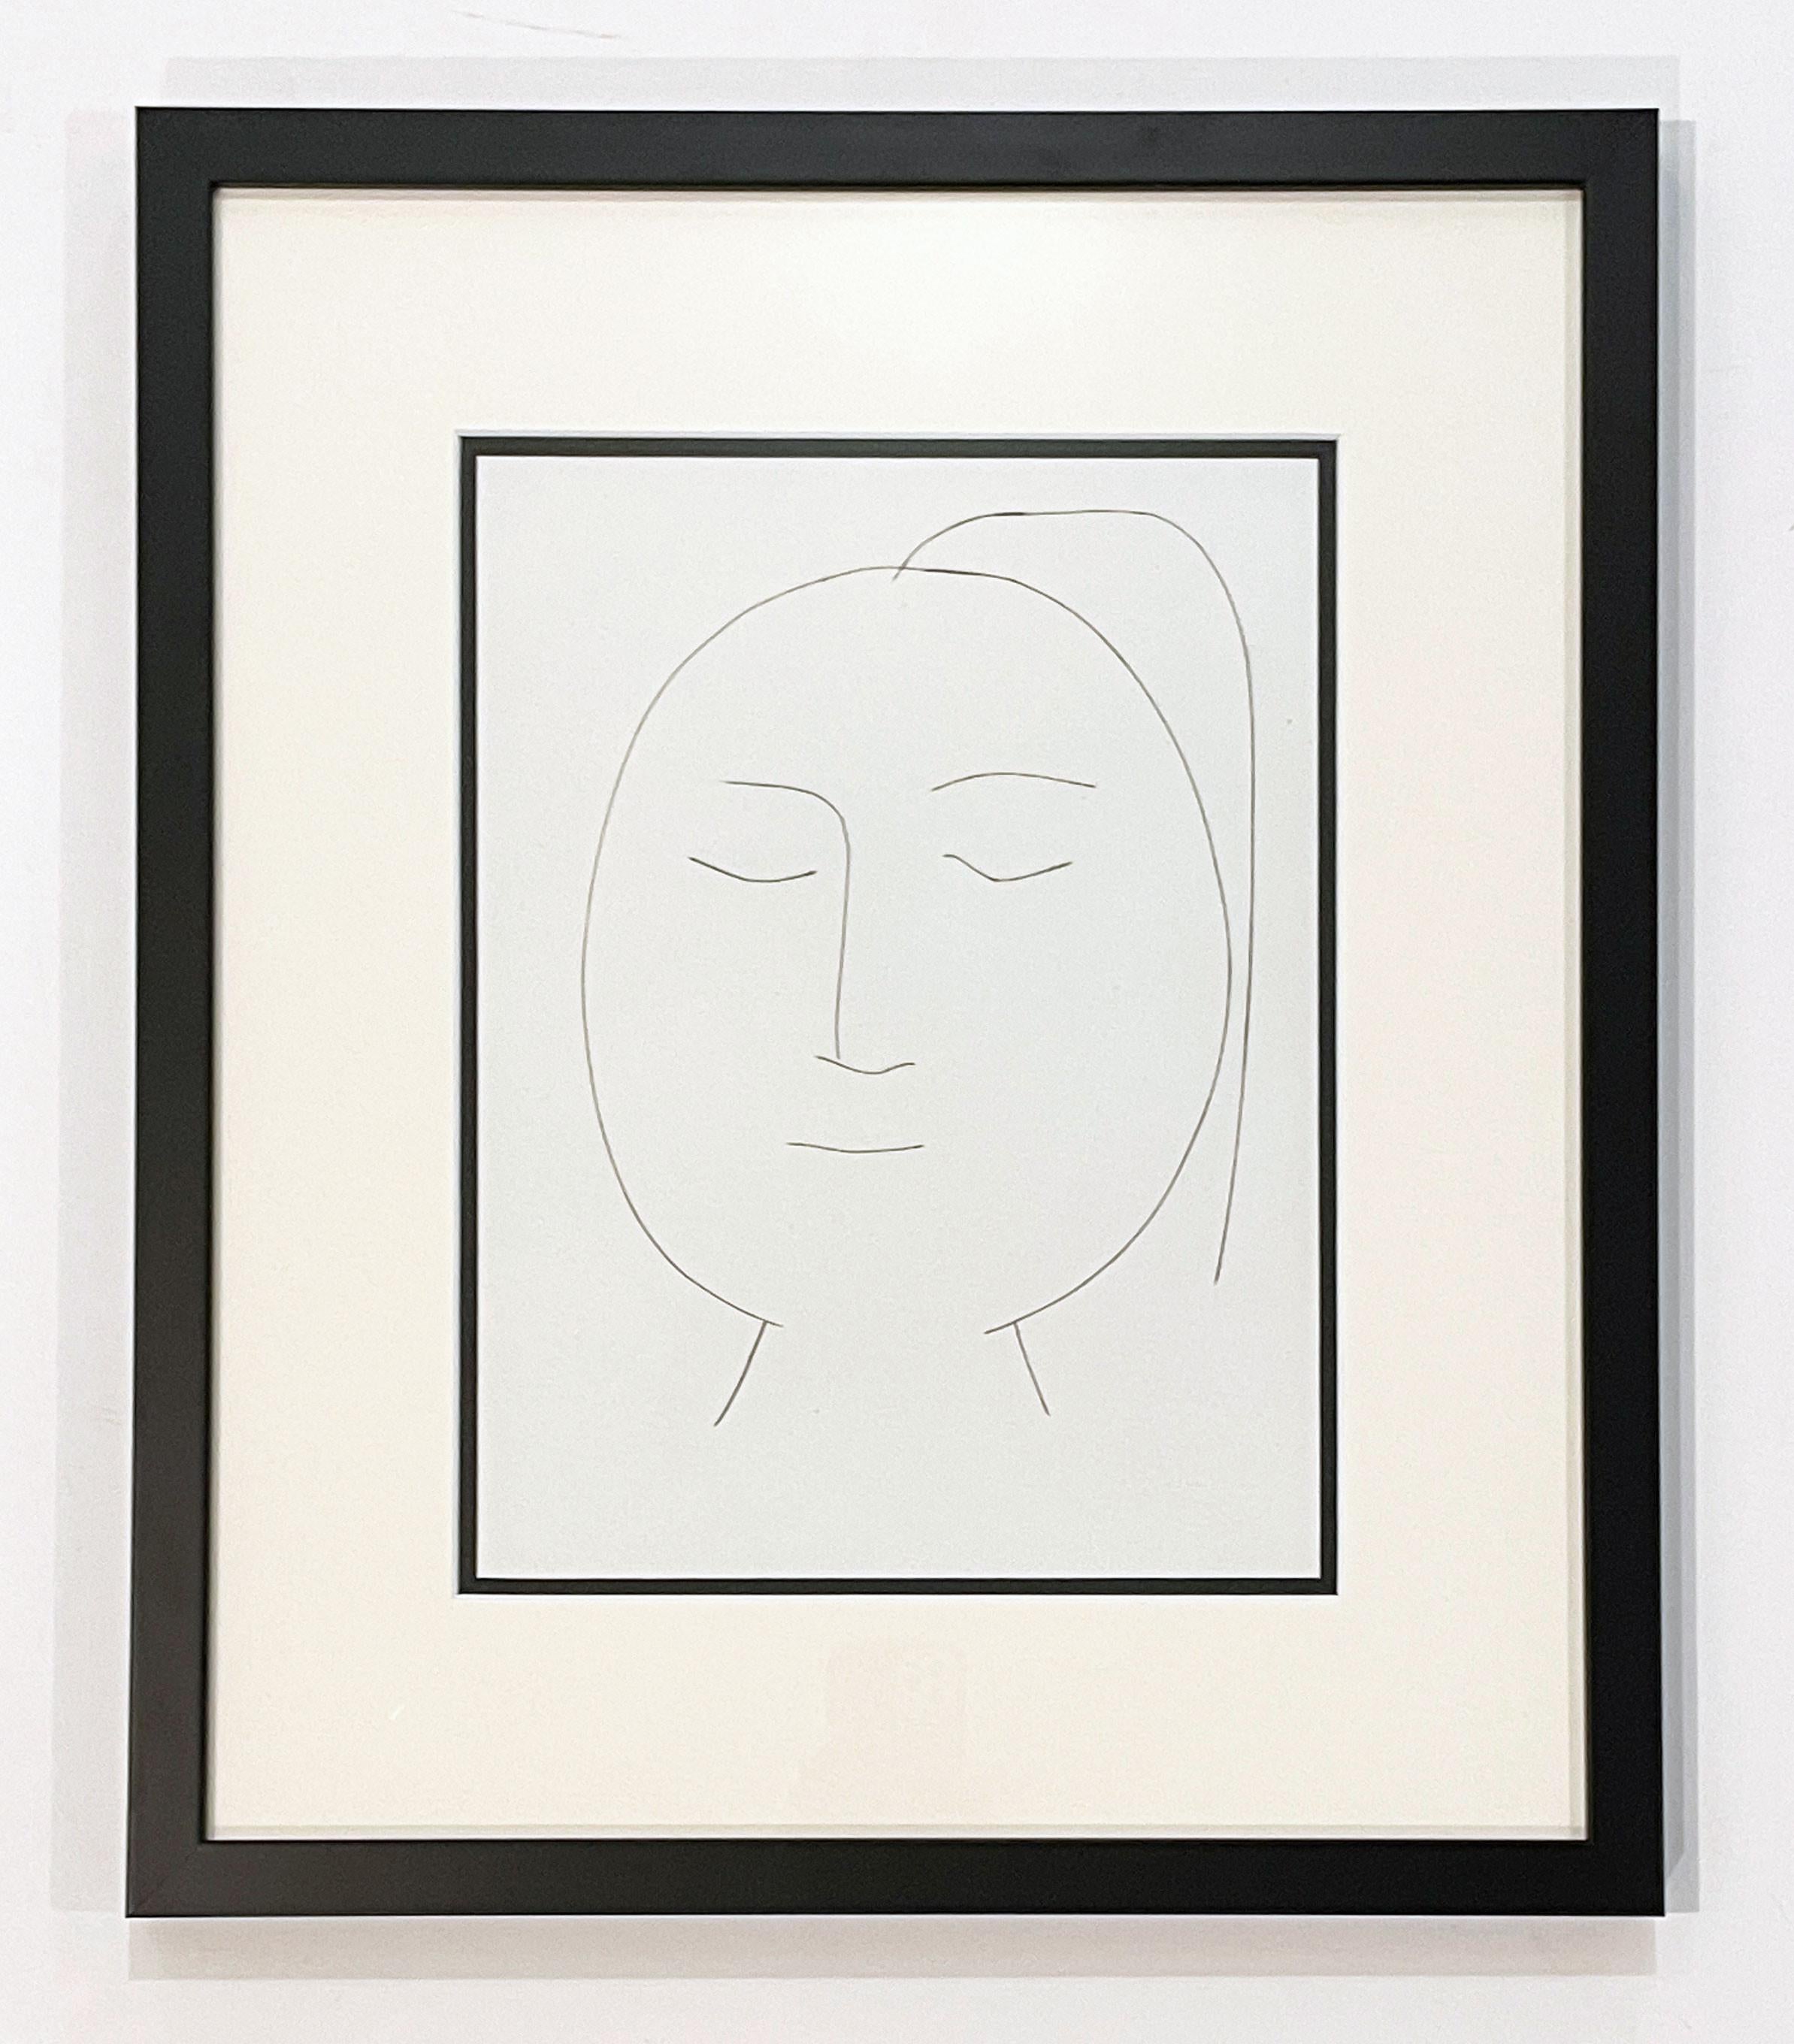 Oval Head of a Woman with Hair (Plate XIX), from Carmen - Print by Pablo Picasso